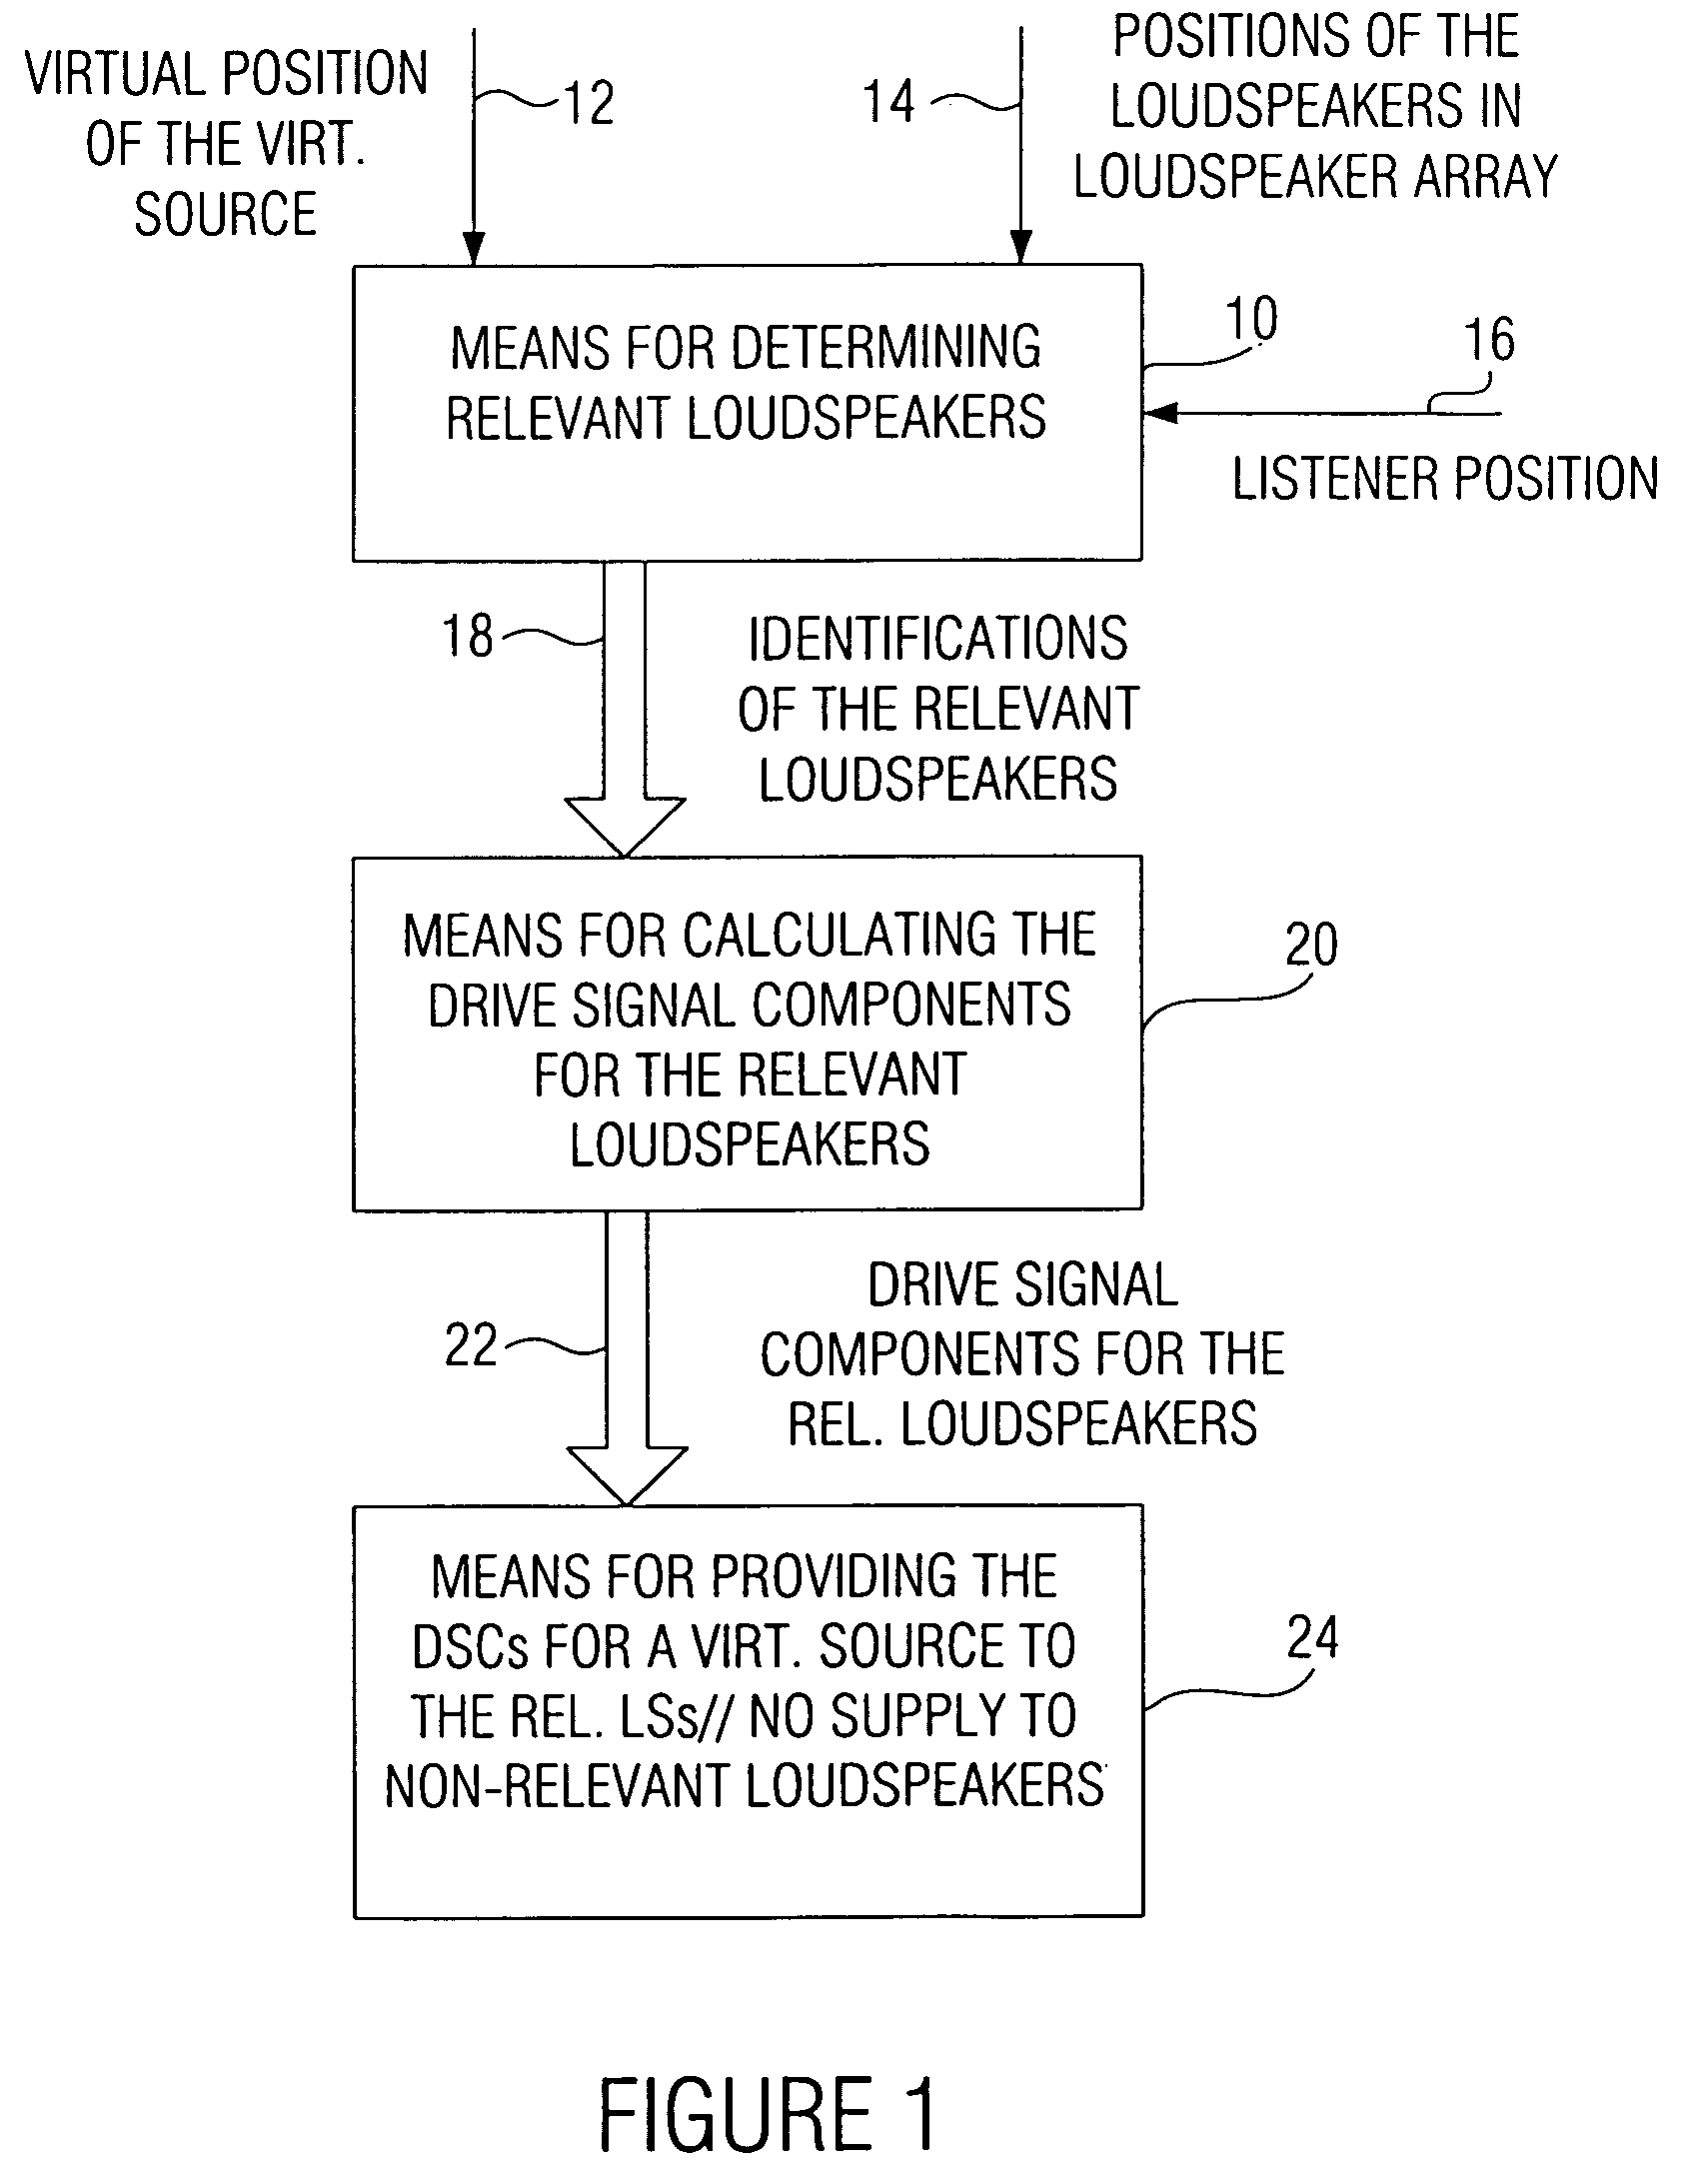 Wave field synthesis apparatus and method of driving an array of loudspeakers